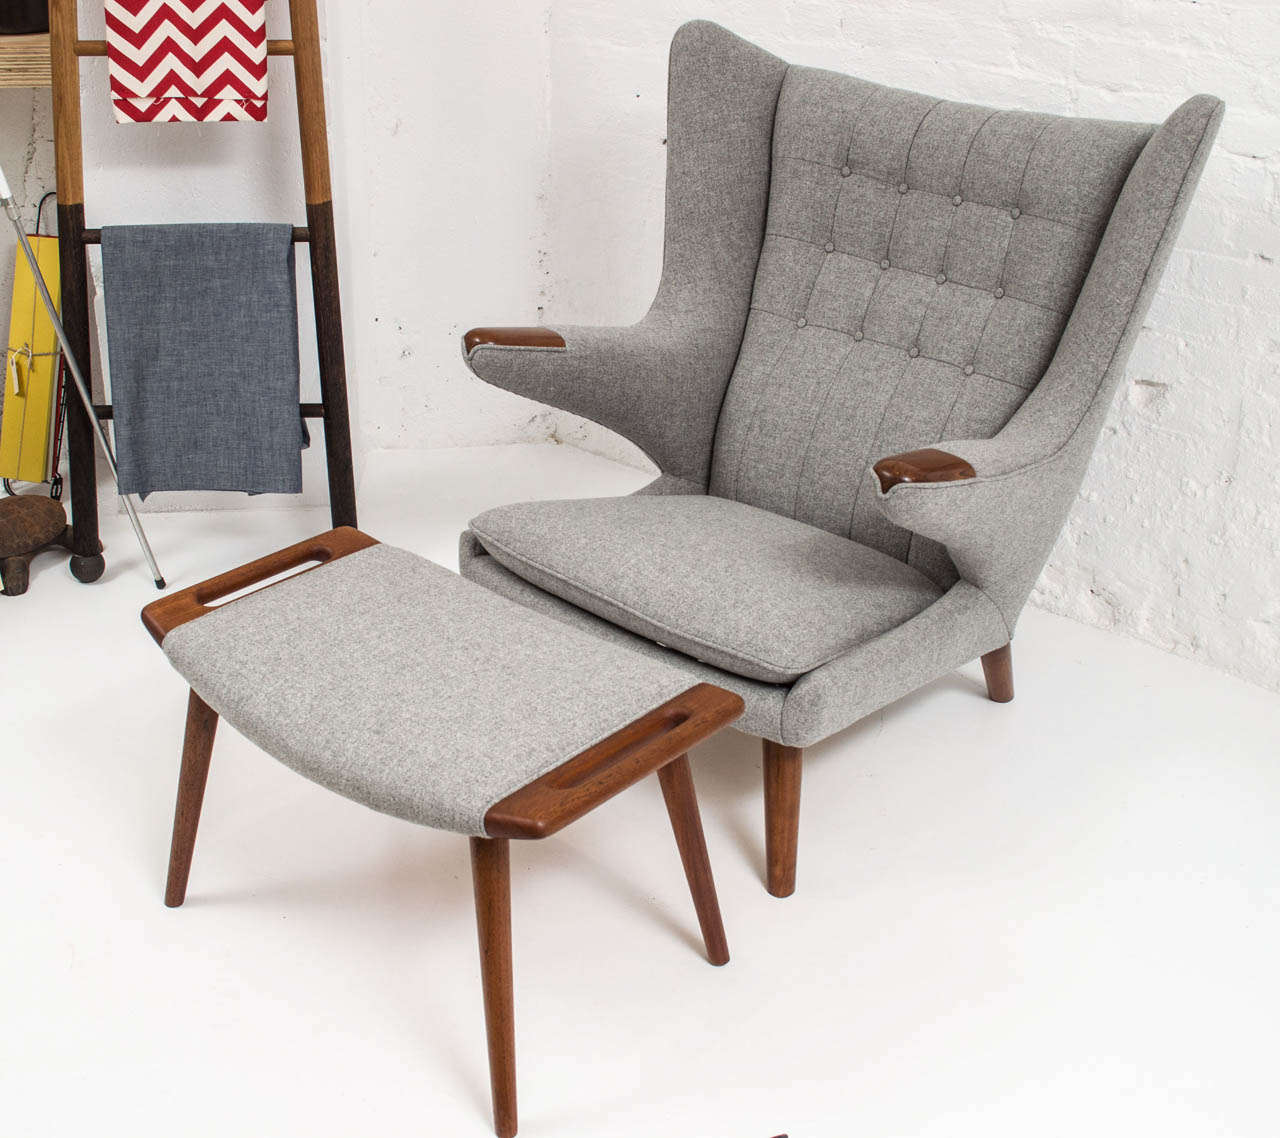 The Hans J. Wegner 'Papa Bear' chair. Designed 1951 and manufactured by AP Stolen, Denmark as model AP19.
With new Maharam wool fabric